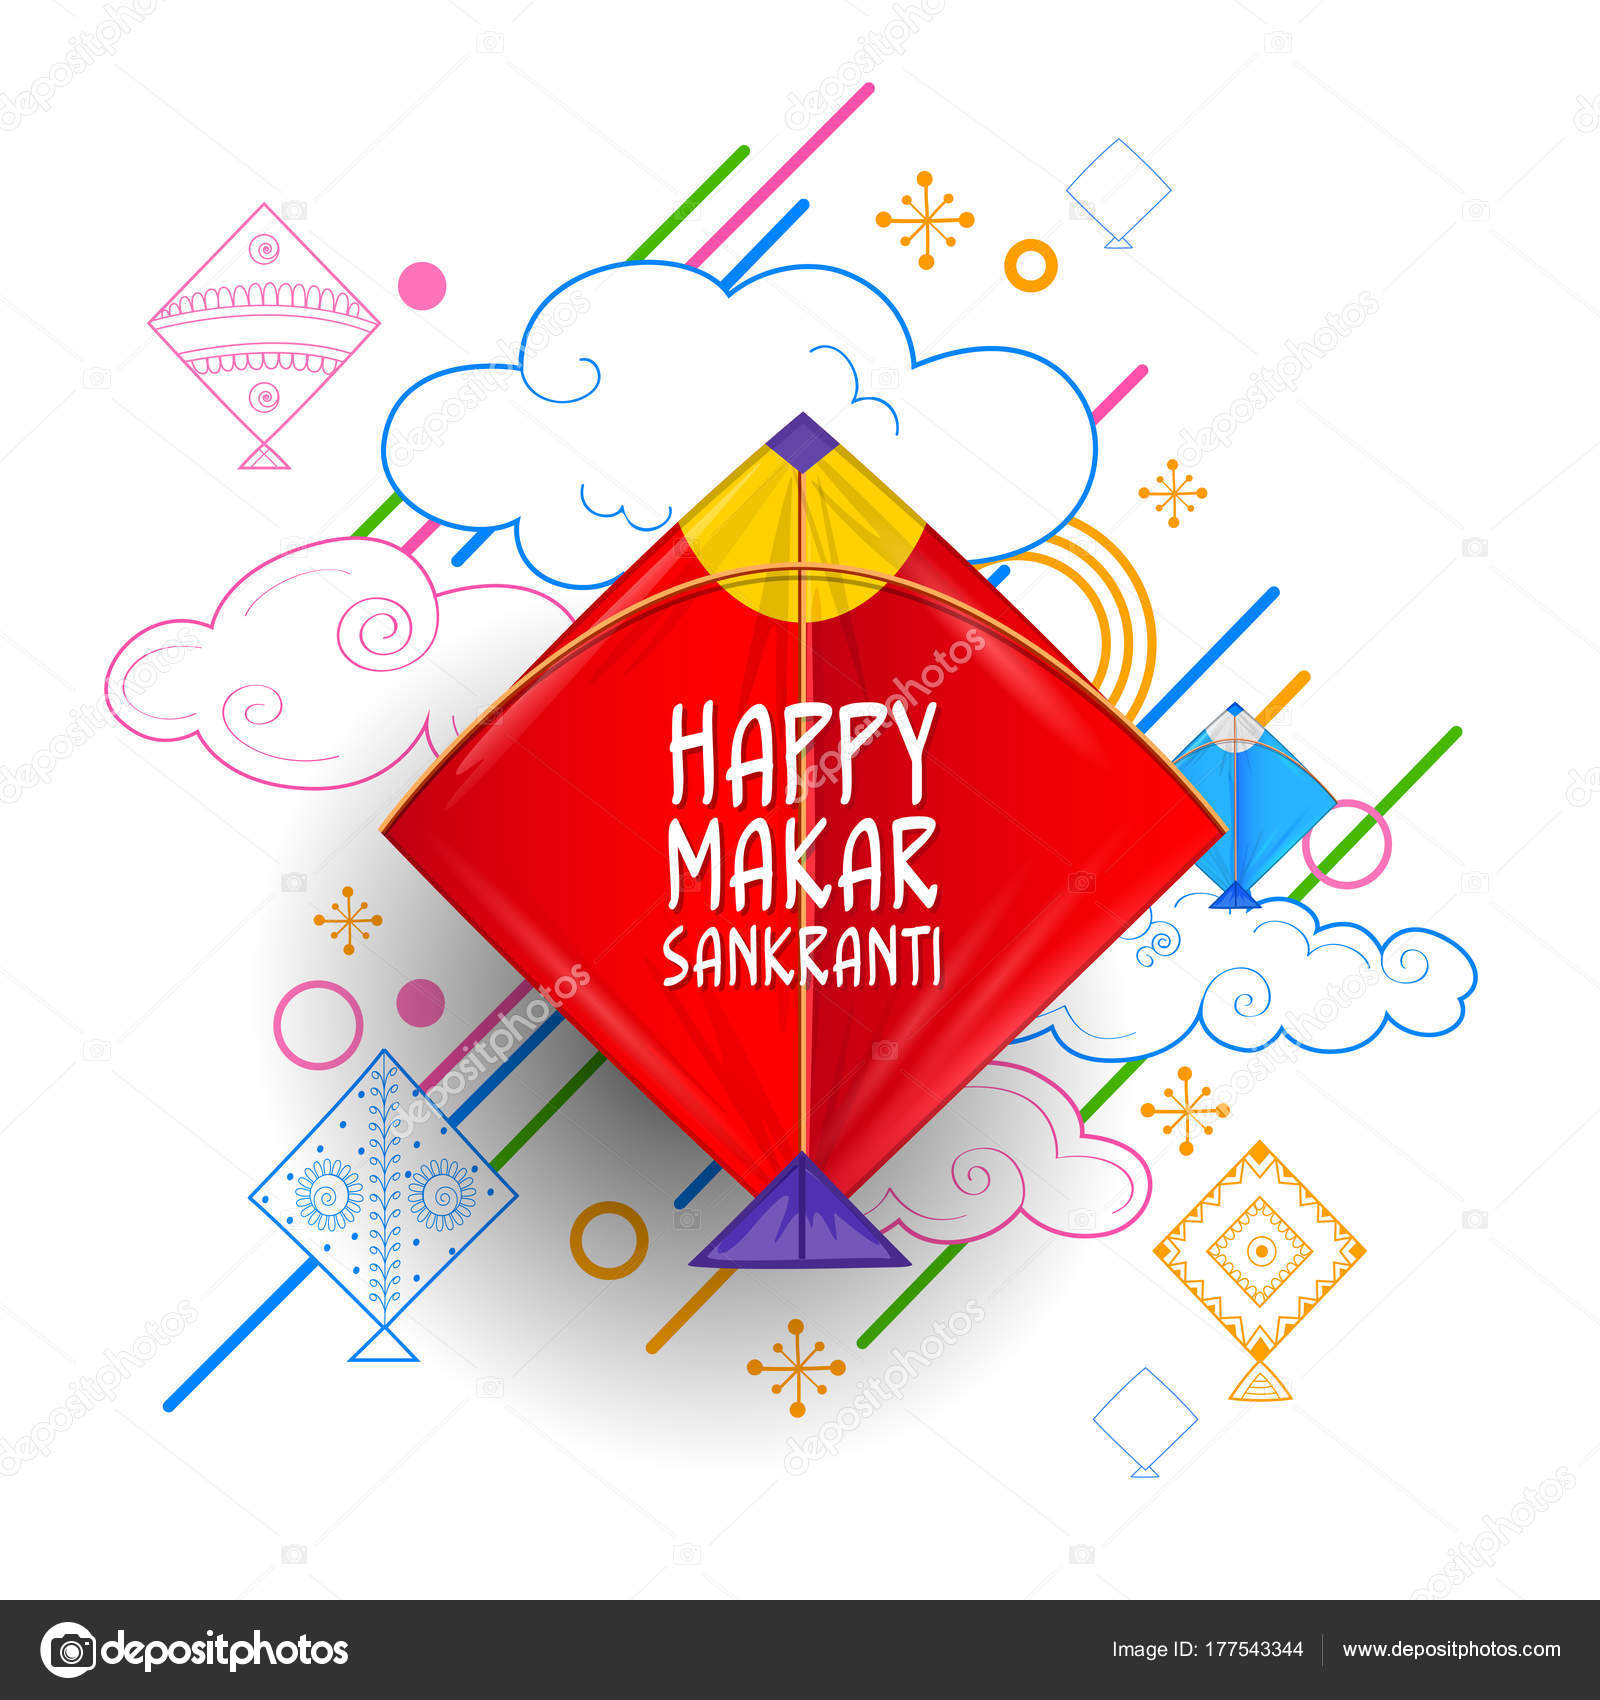 Happy Makar Sankranti Images 2023: Whatsapp Wishes, Images, Quotes, Status,  Photos, SMS, Messages, GIF Pics, Greeting Card, HD Wallpapers